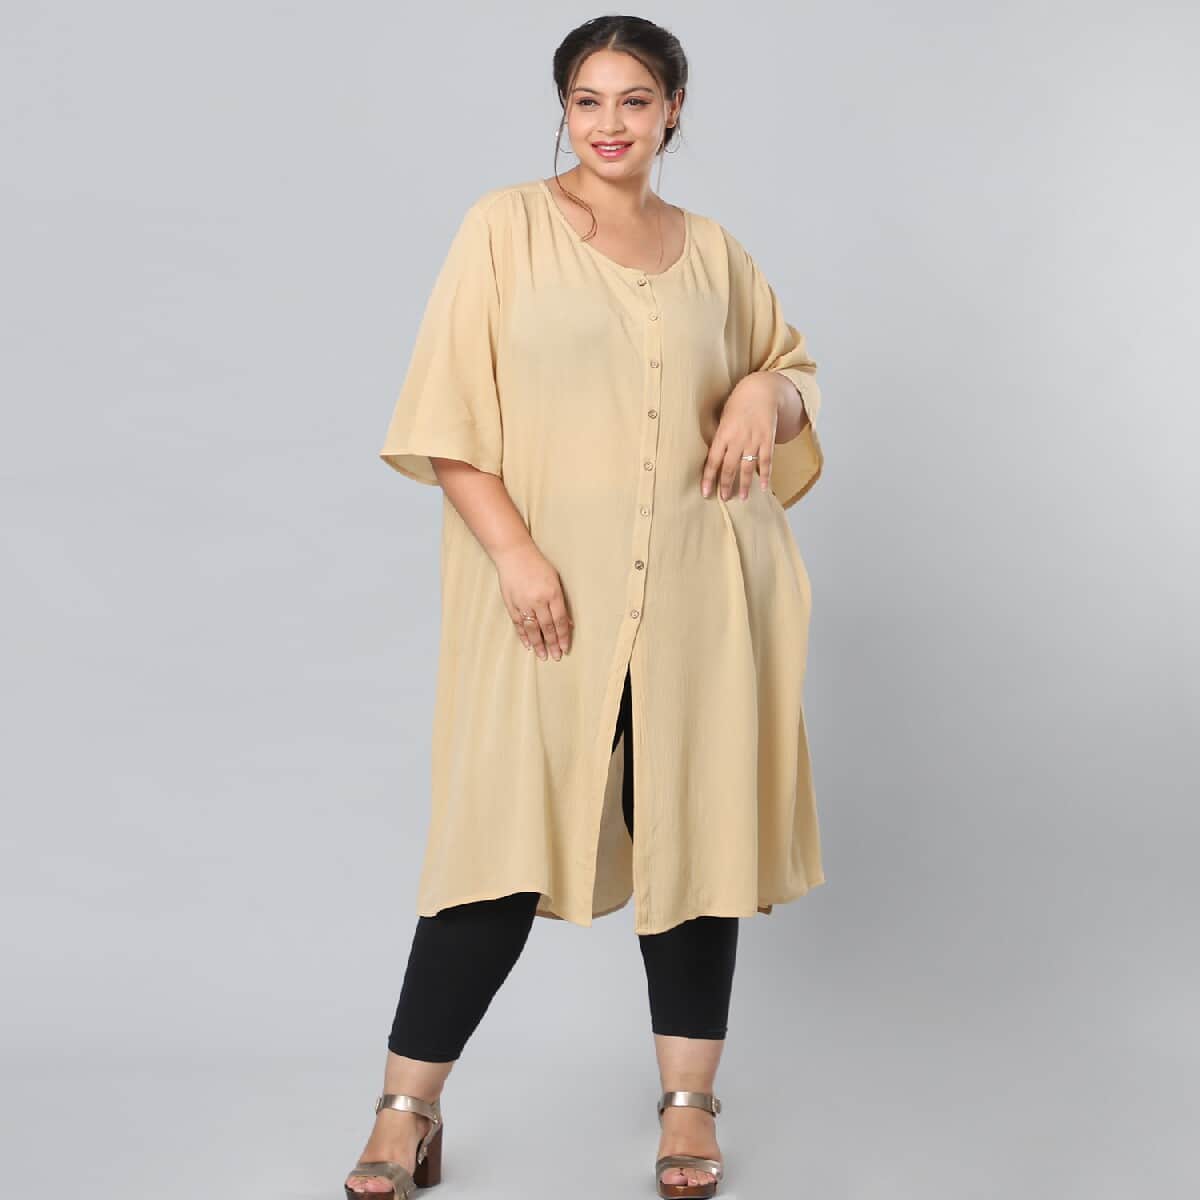 Beige 100% Rayon Top with Front Closure with Button- XXL/XXXL image number 0